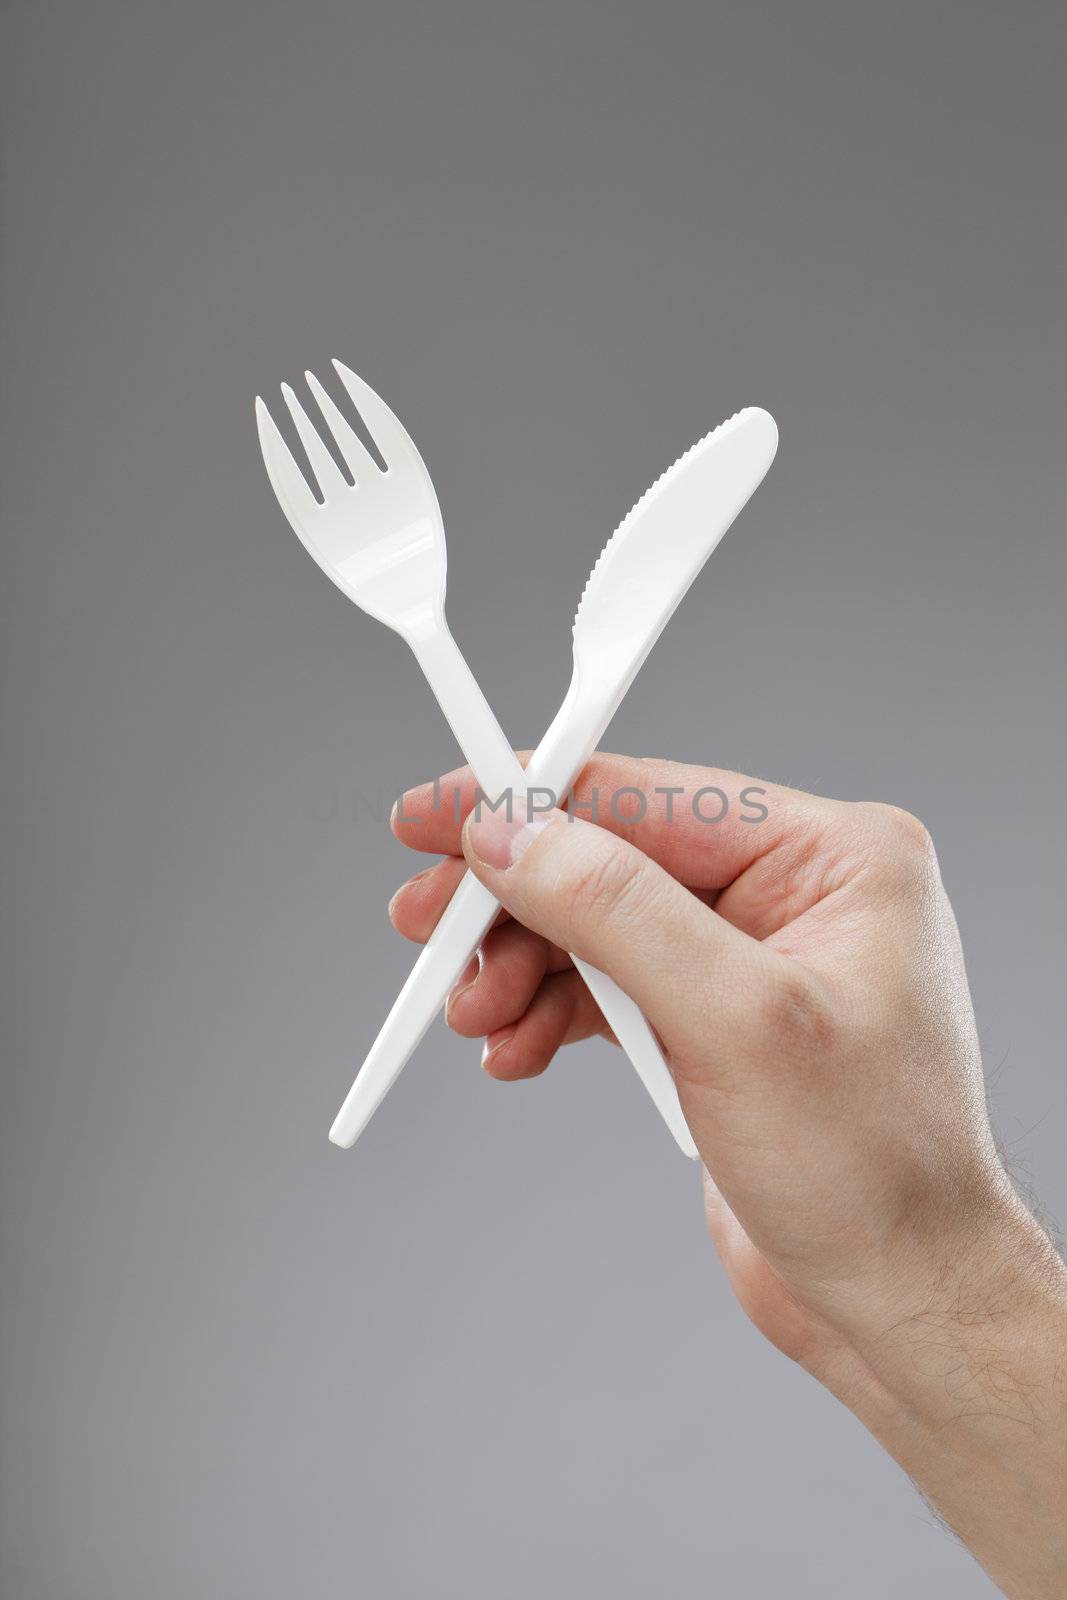 Disposable cutlery by Stocksnapper